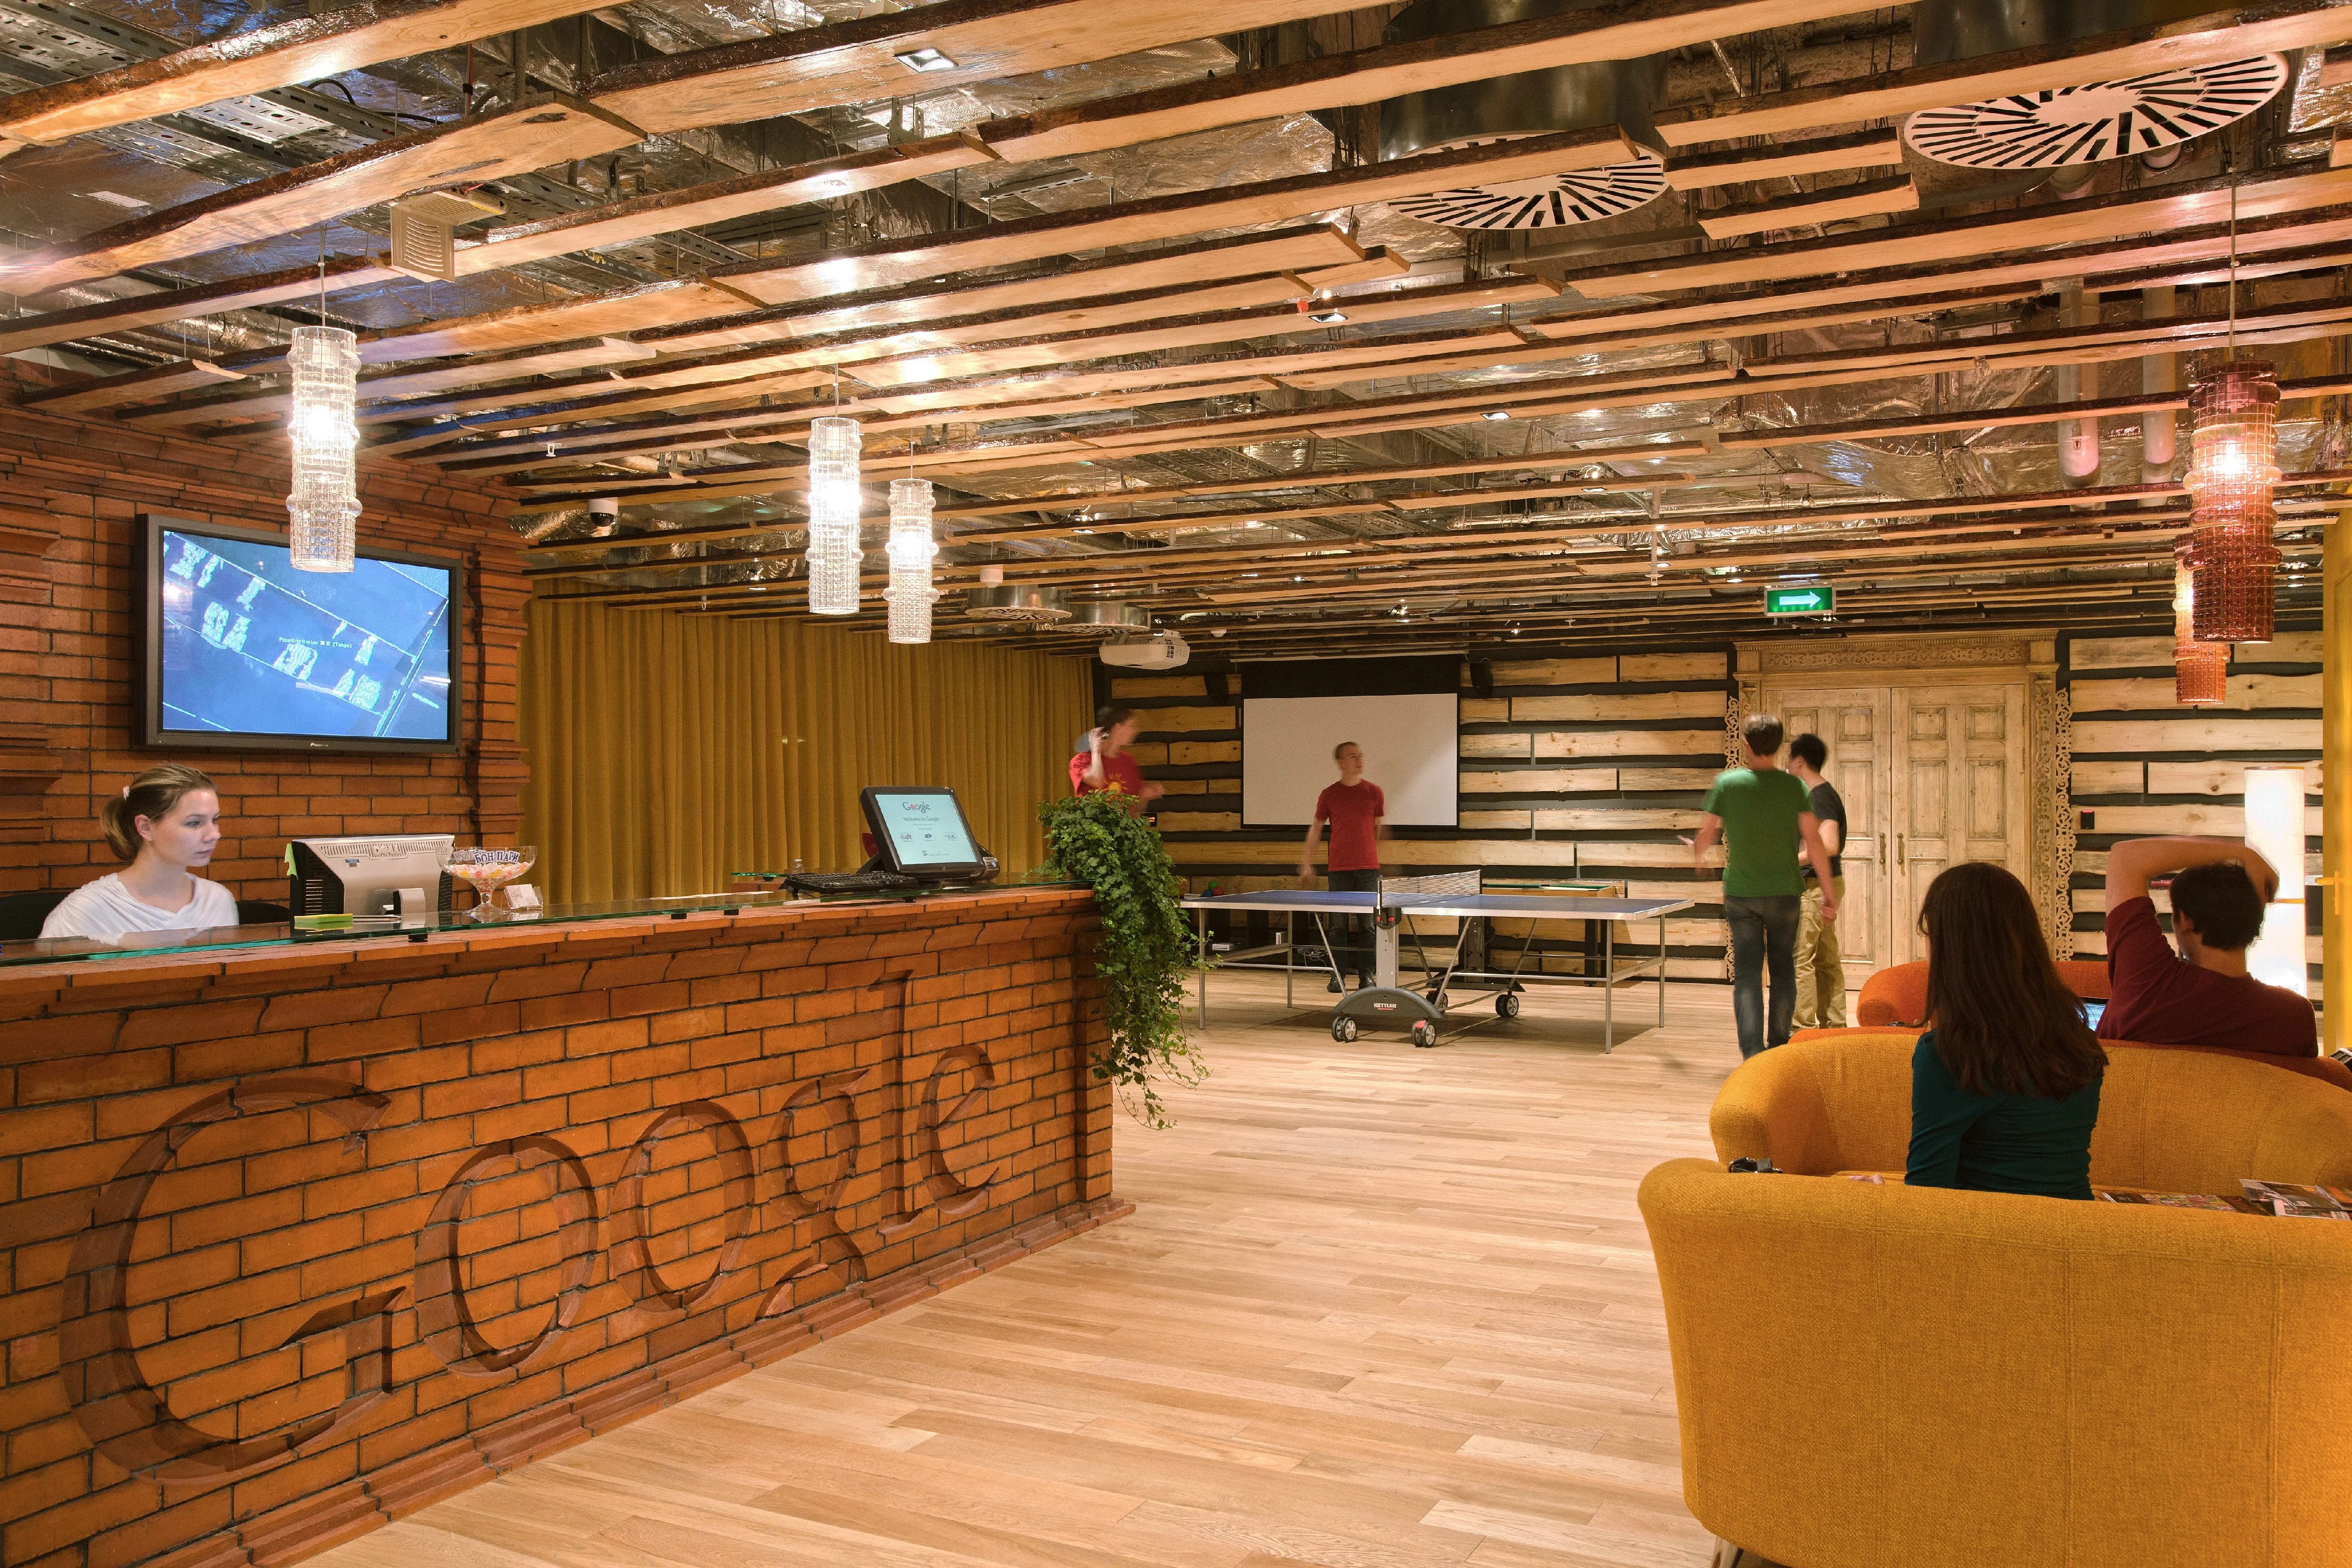 Google office in Moscow, Russia designed in 2012